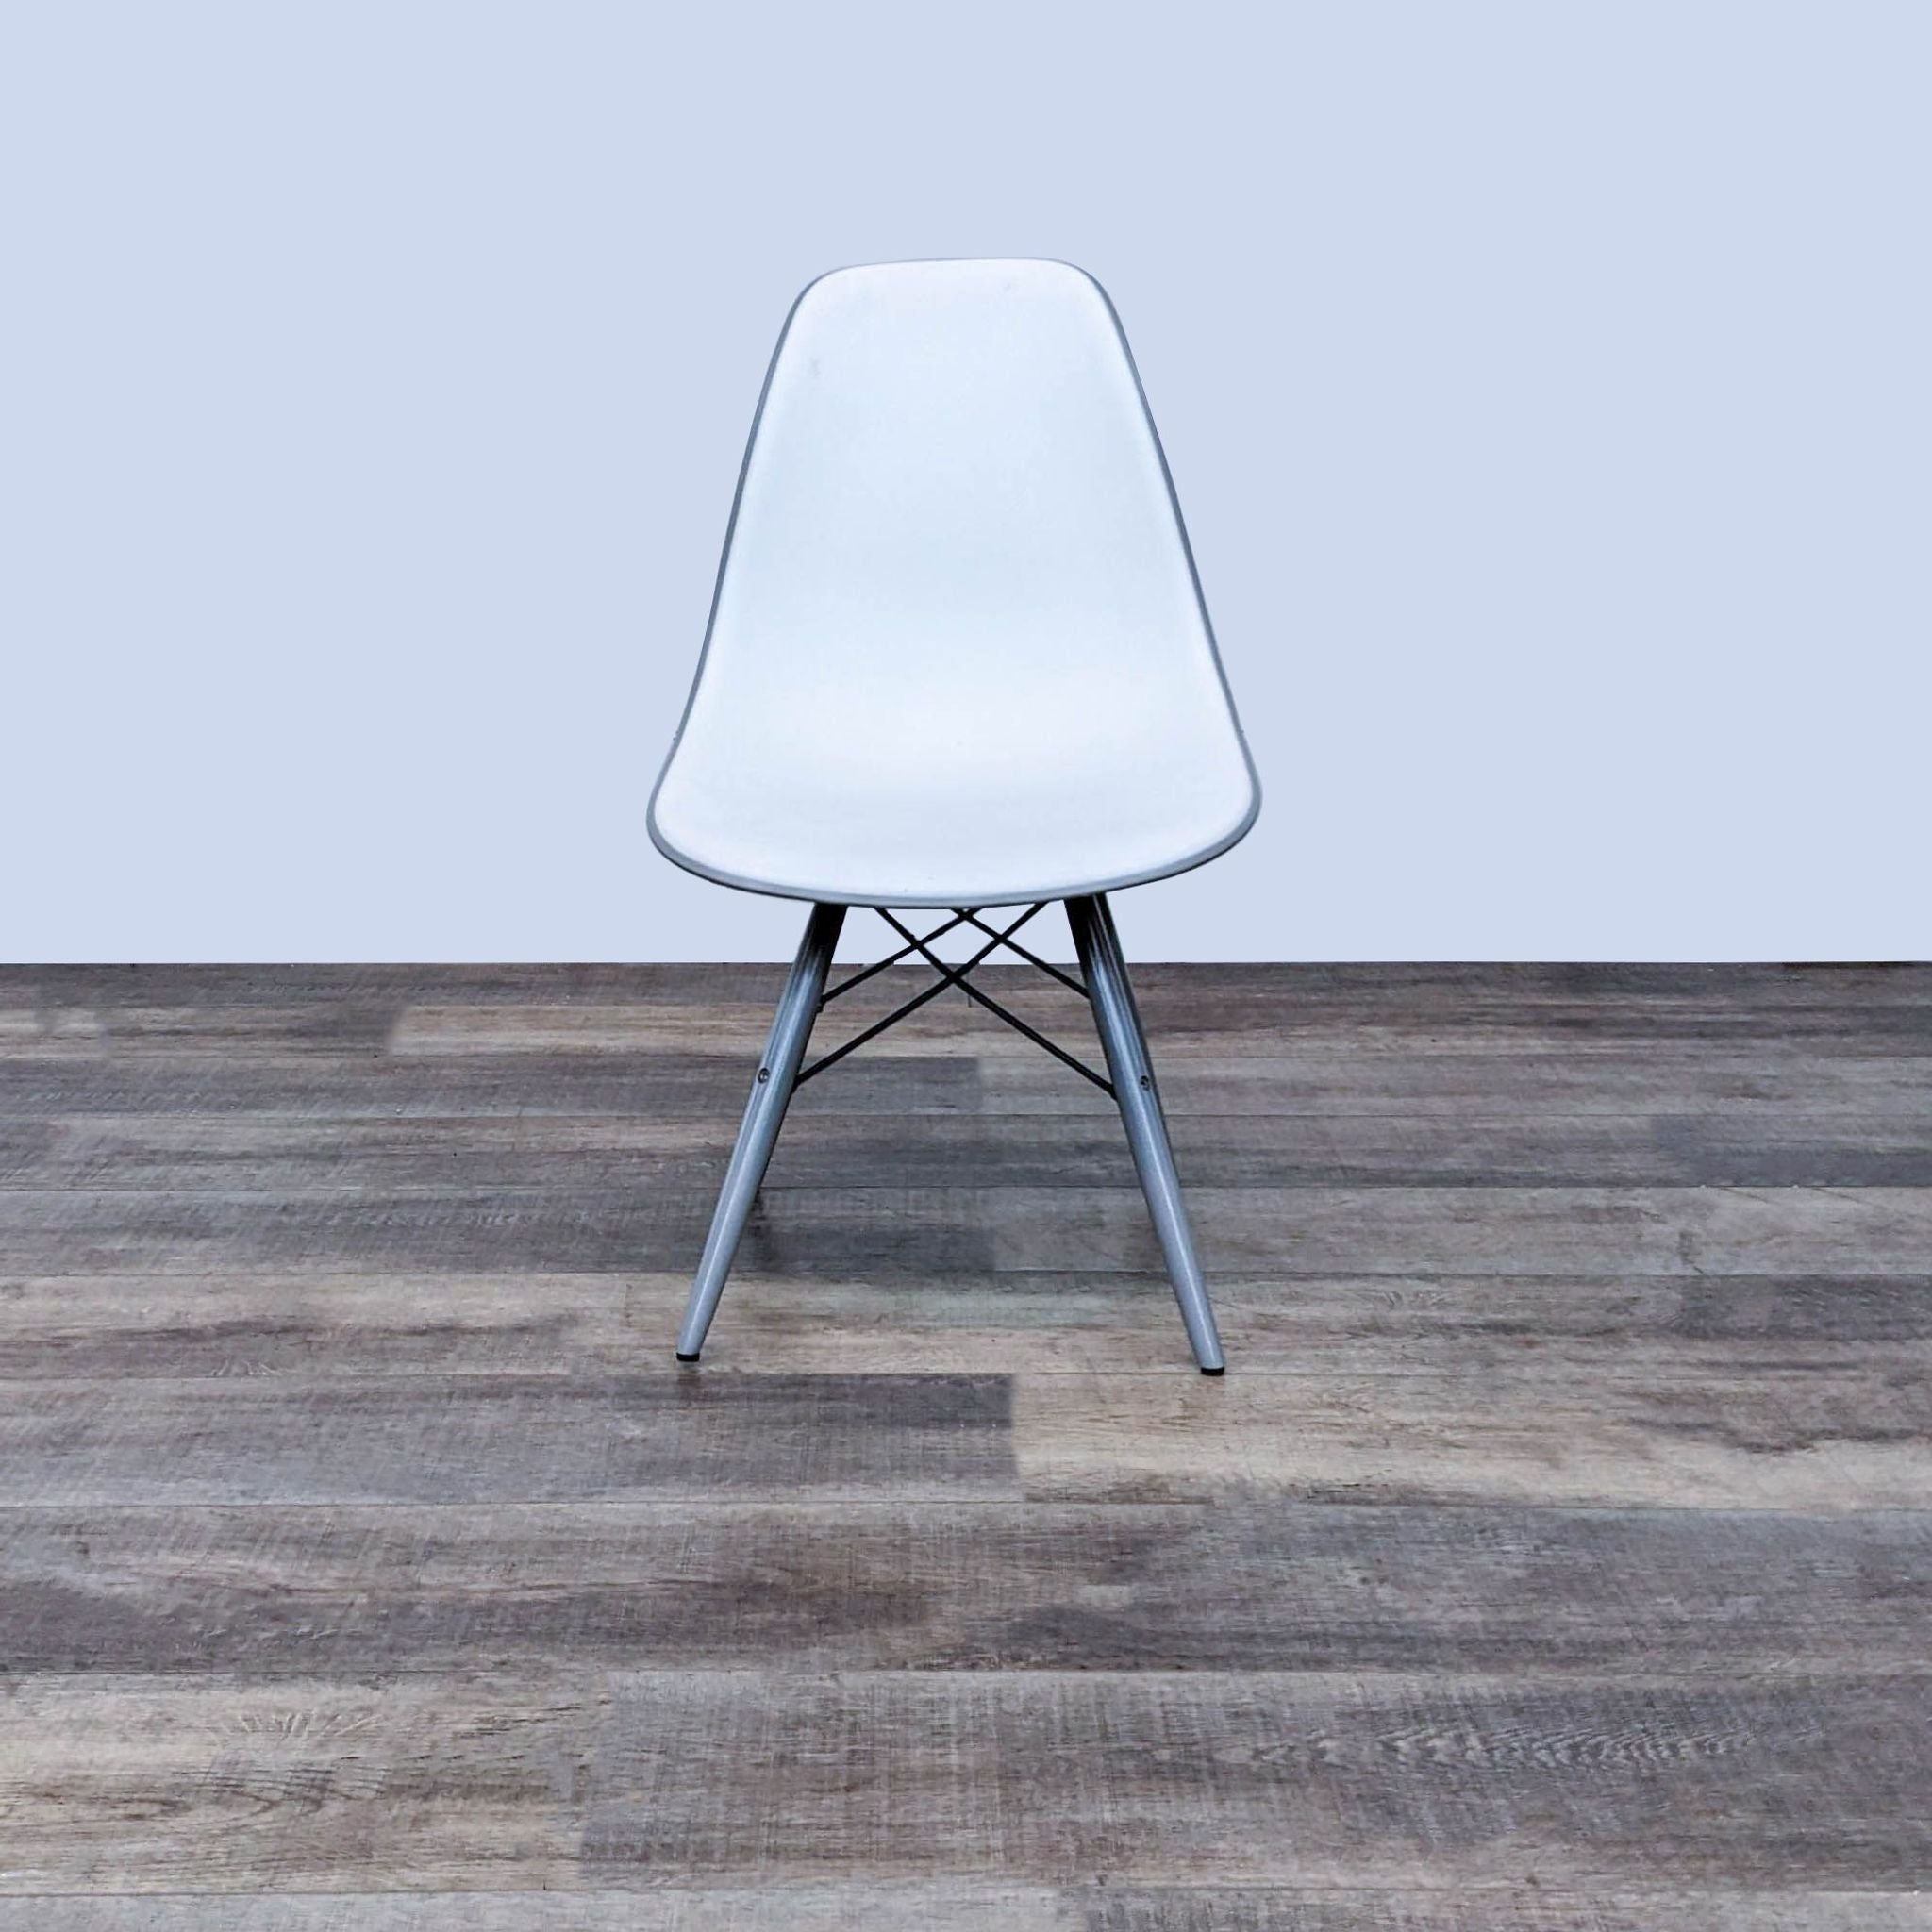 Reperch modern two-toned dining chair with white polypropylene seat and Eiffel-style metal base on wood floor.